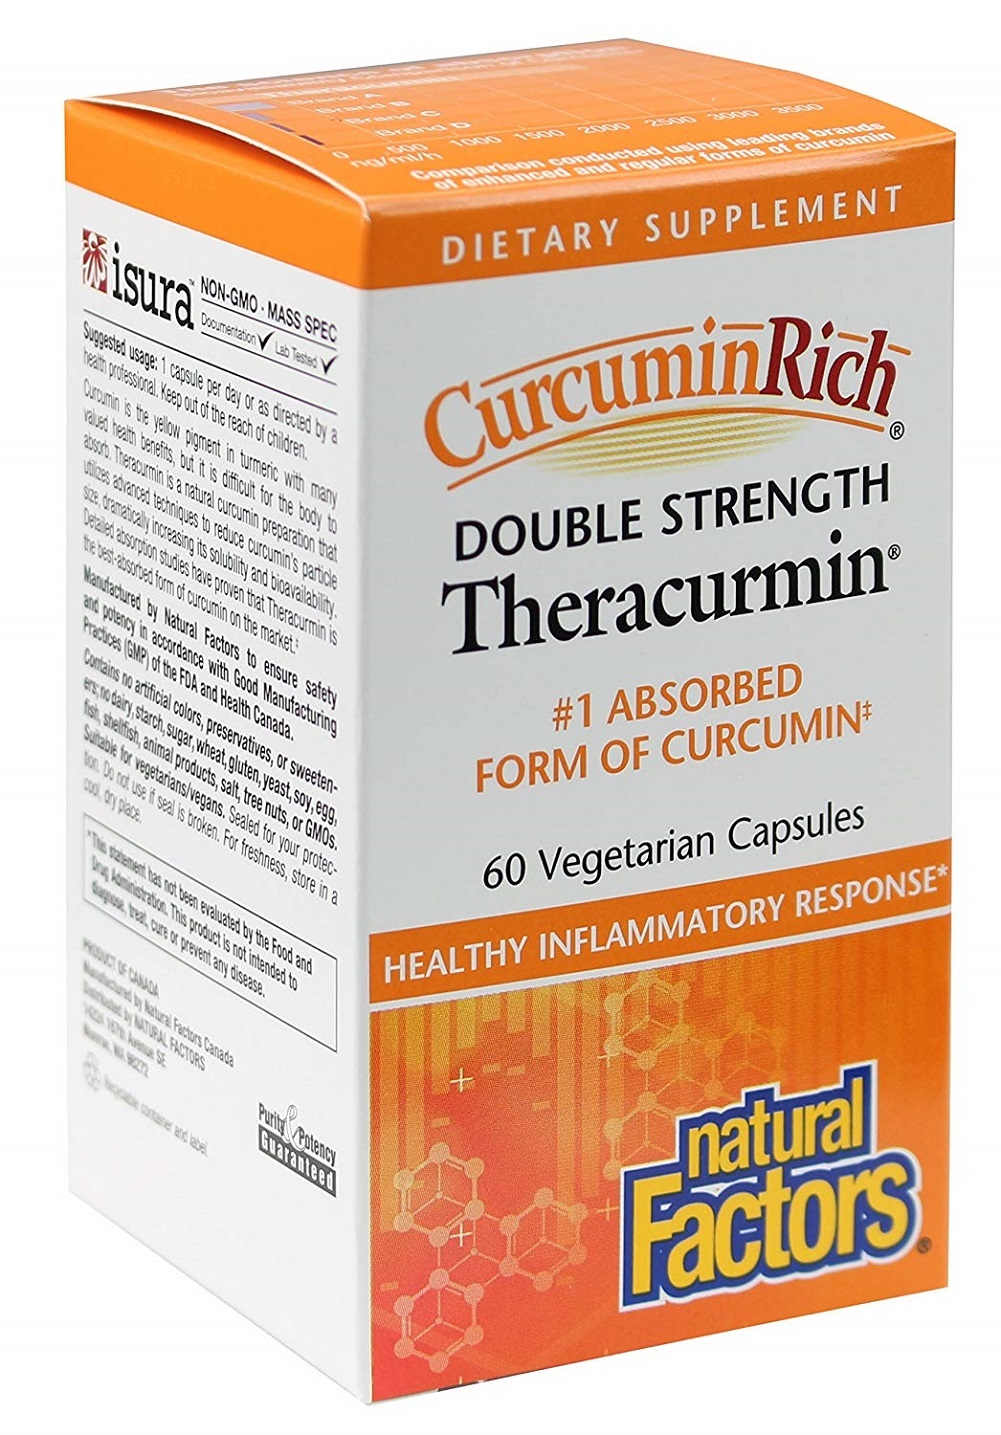 Natural Factors CurcuminRich Double Strength Theracurmin 60 capsules